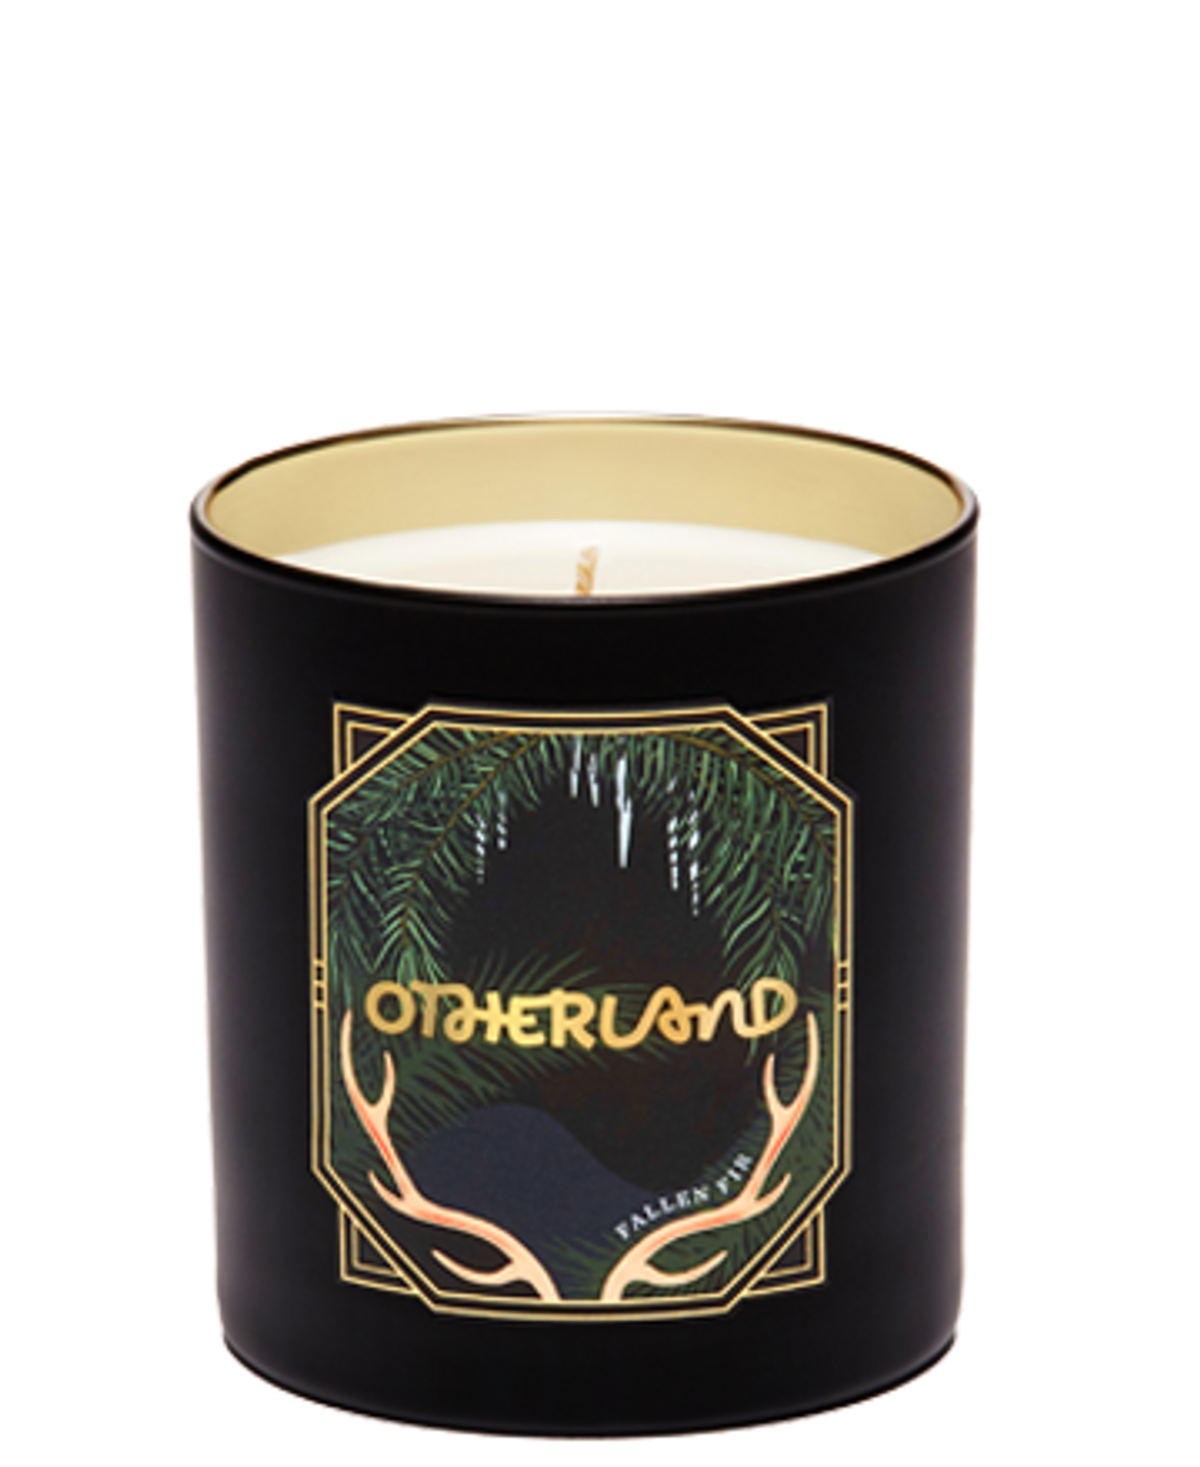 Otherland Gilded Collection Candle